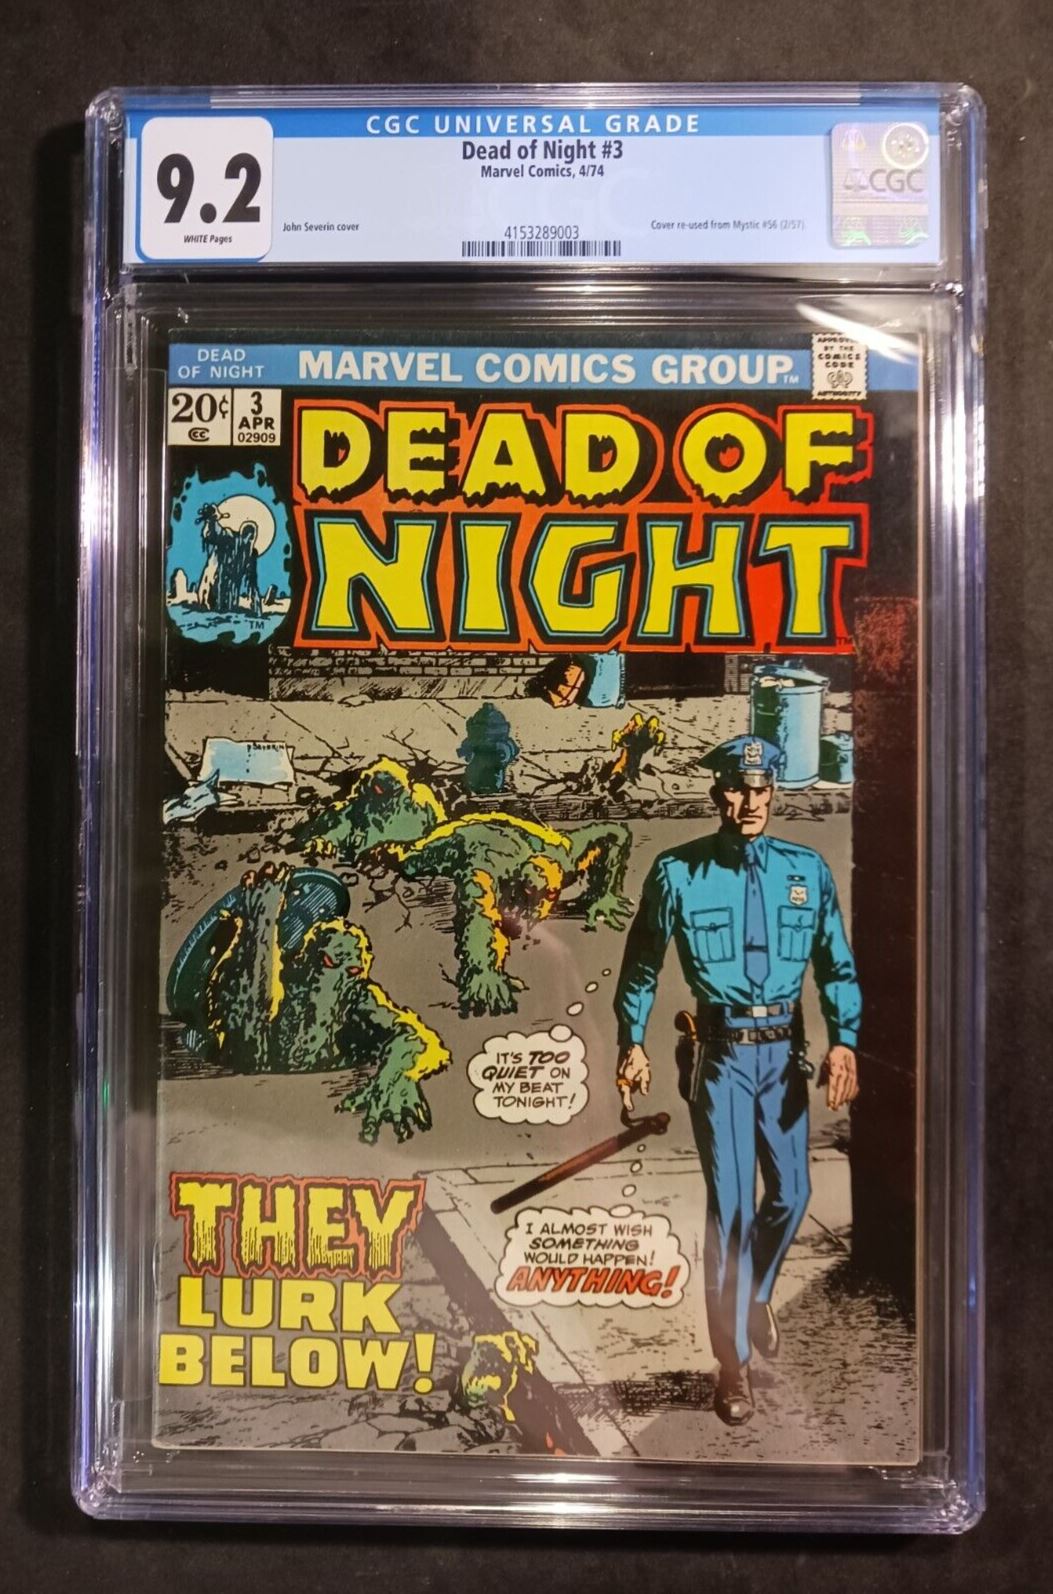 Dead of Night #3 Marvel Comics 1974 CGC 9.2 White Pages Serial #4153289003